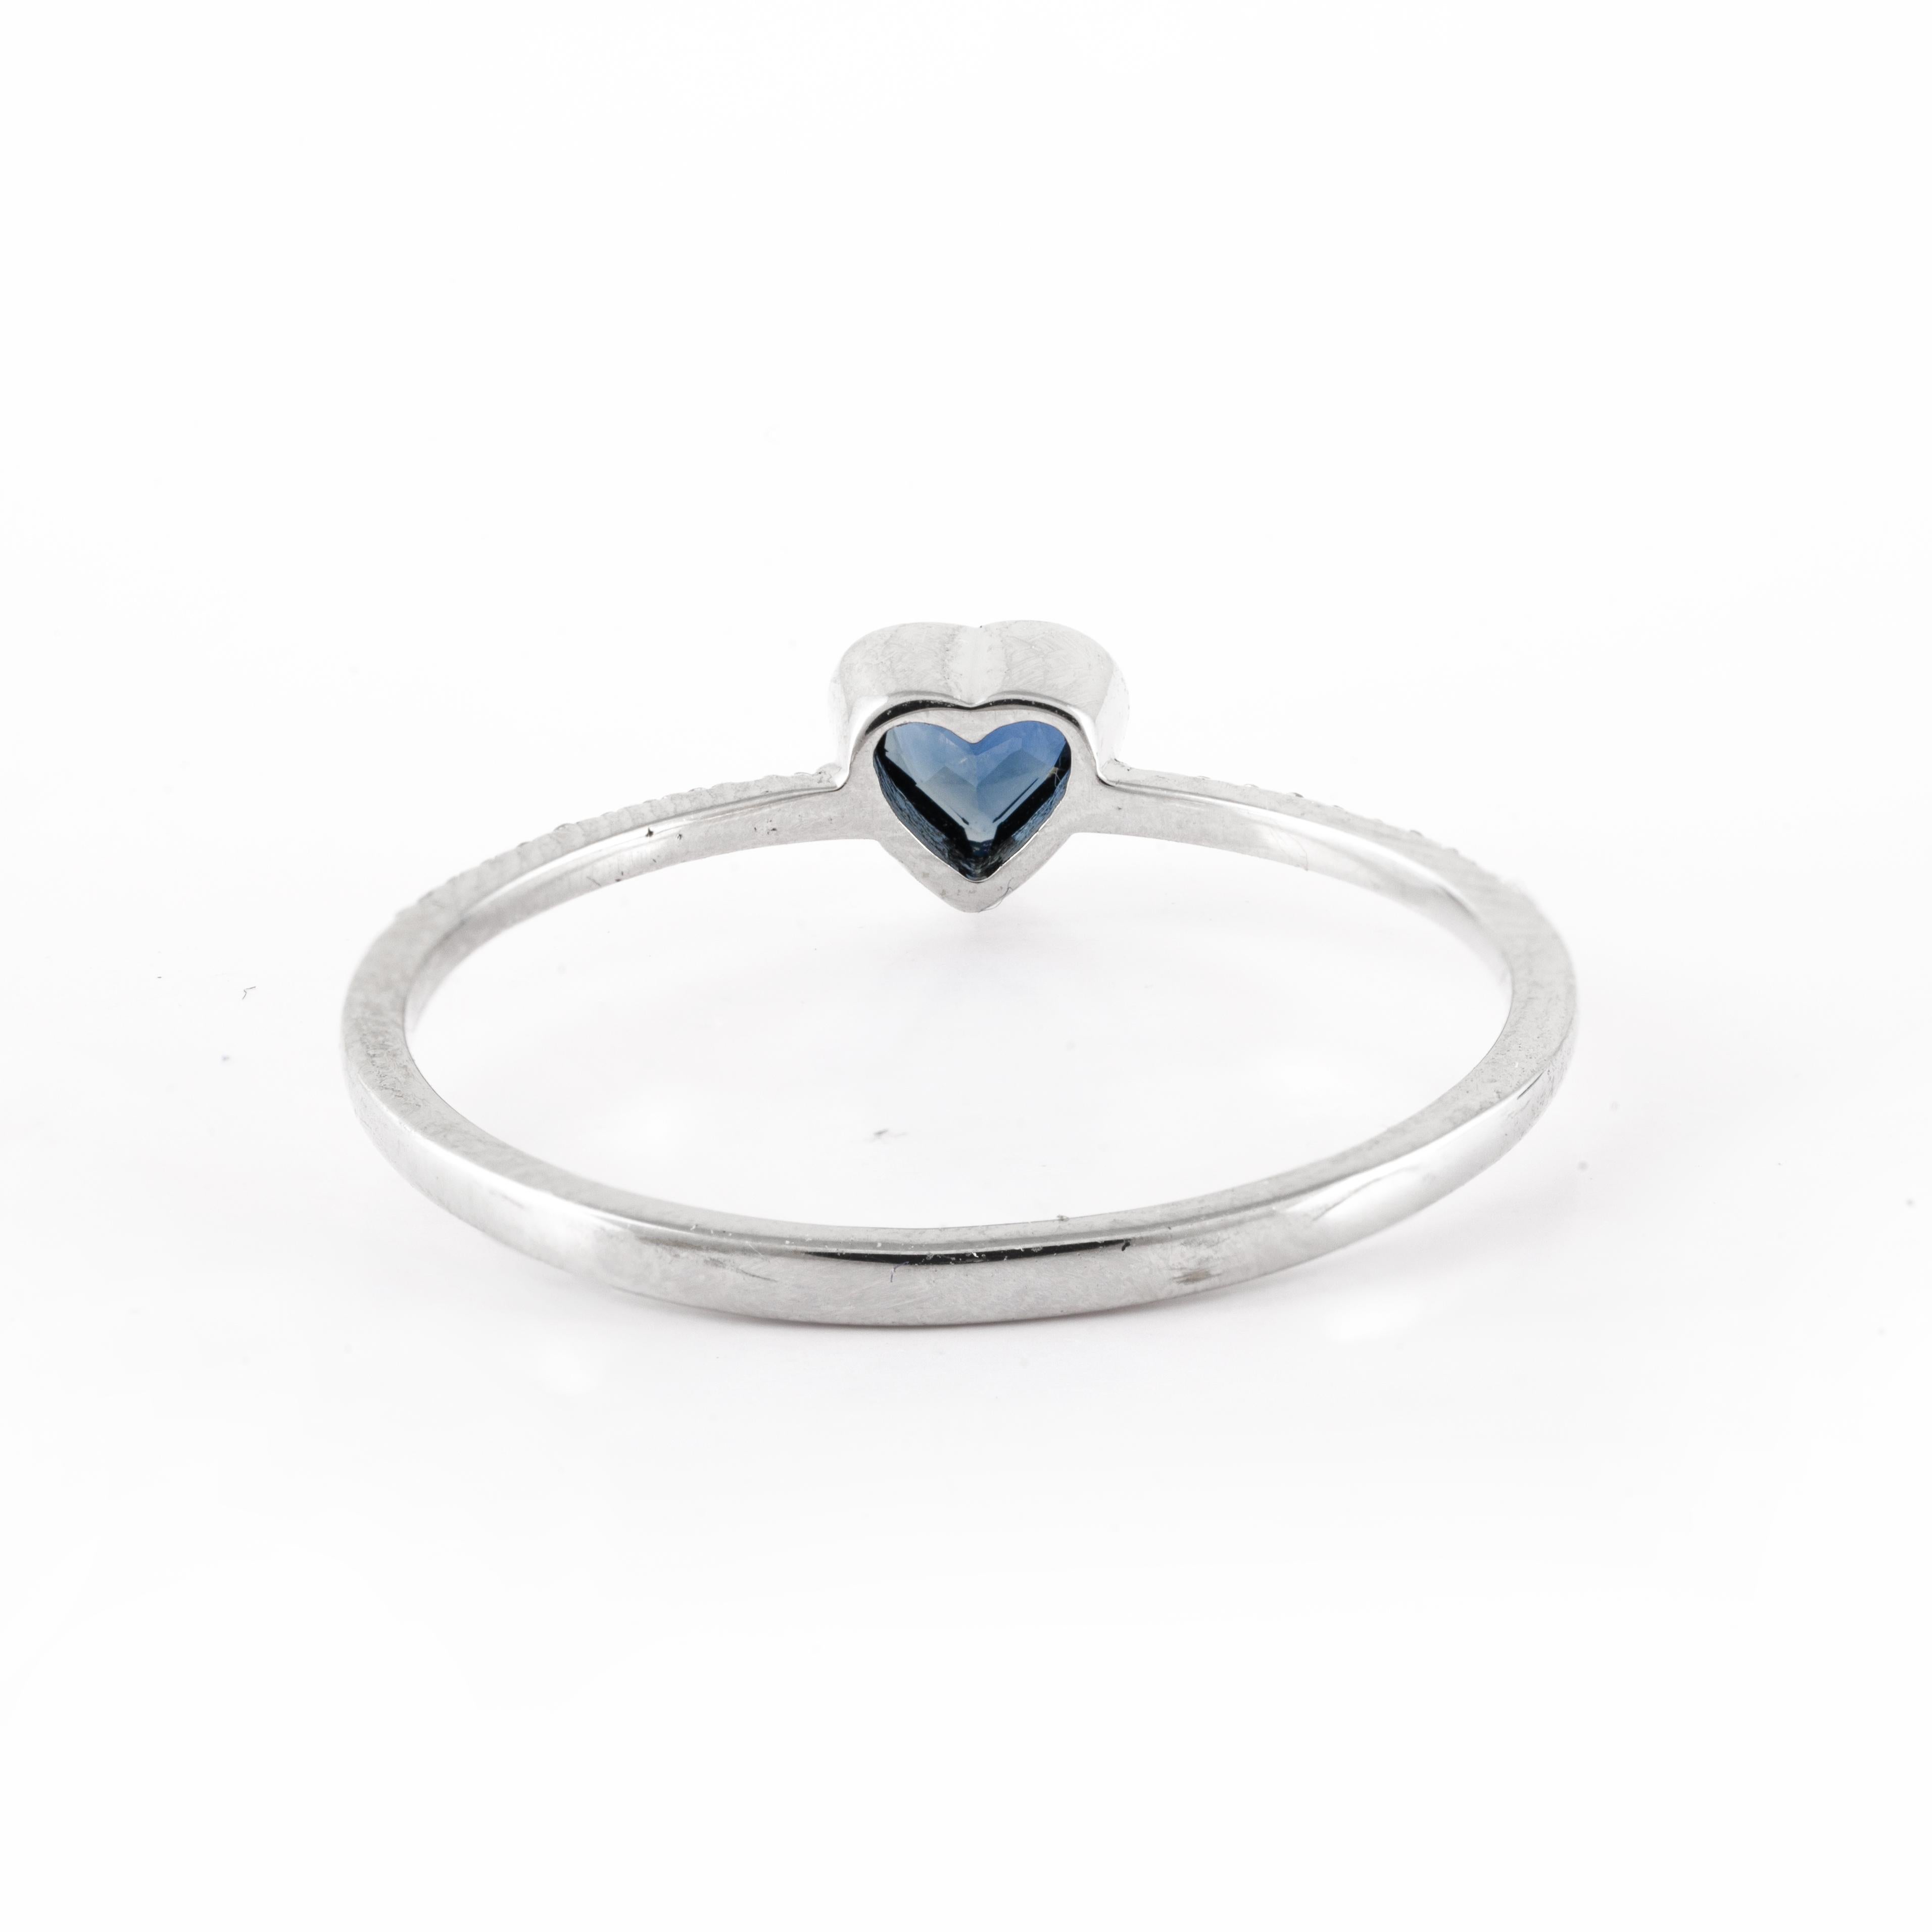 For Sale:  18 Karat Solid White Gold Dainty Blue Sapphire Heart Promise Ring with Diamonds 6